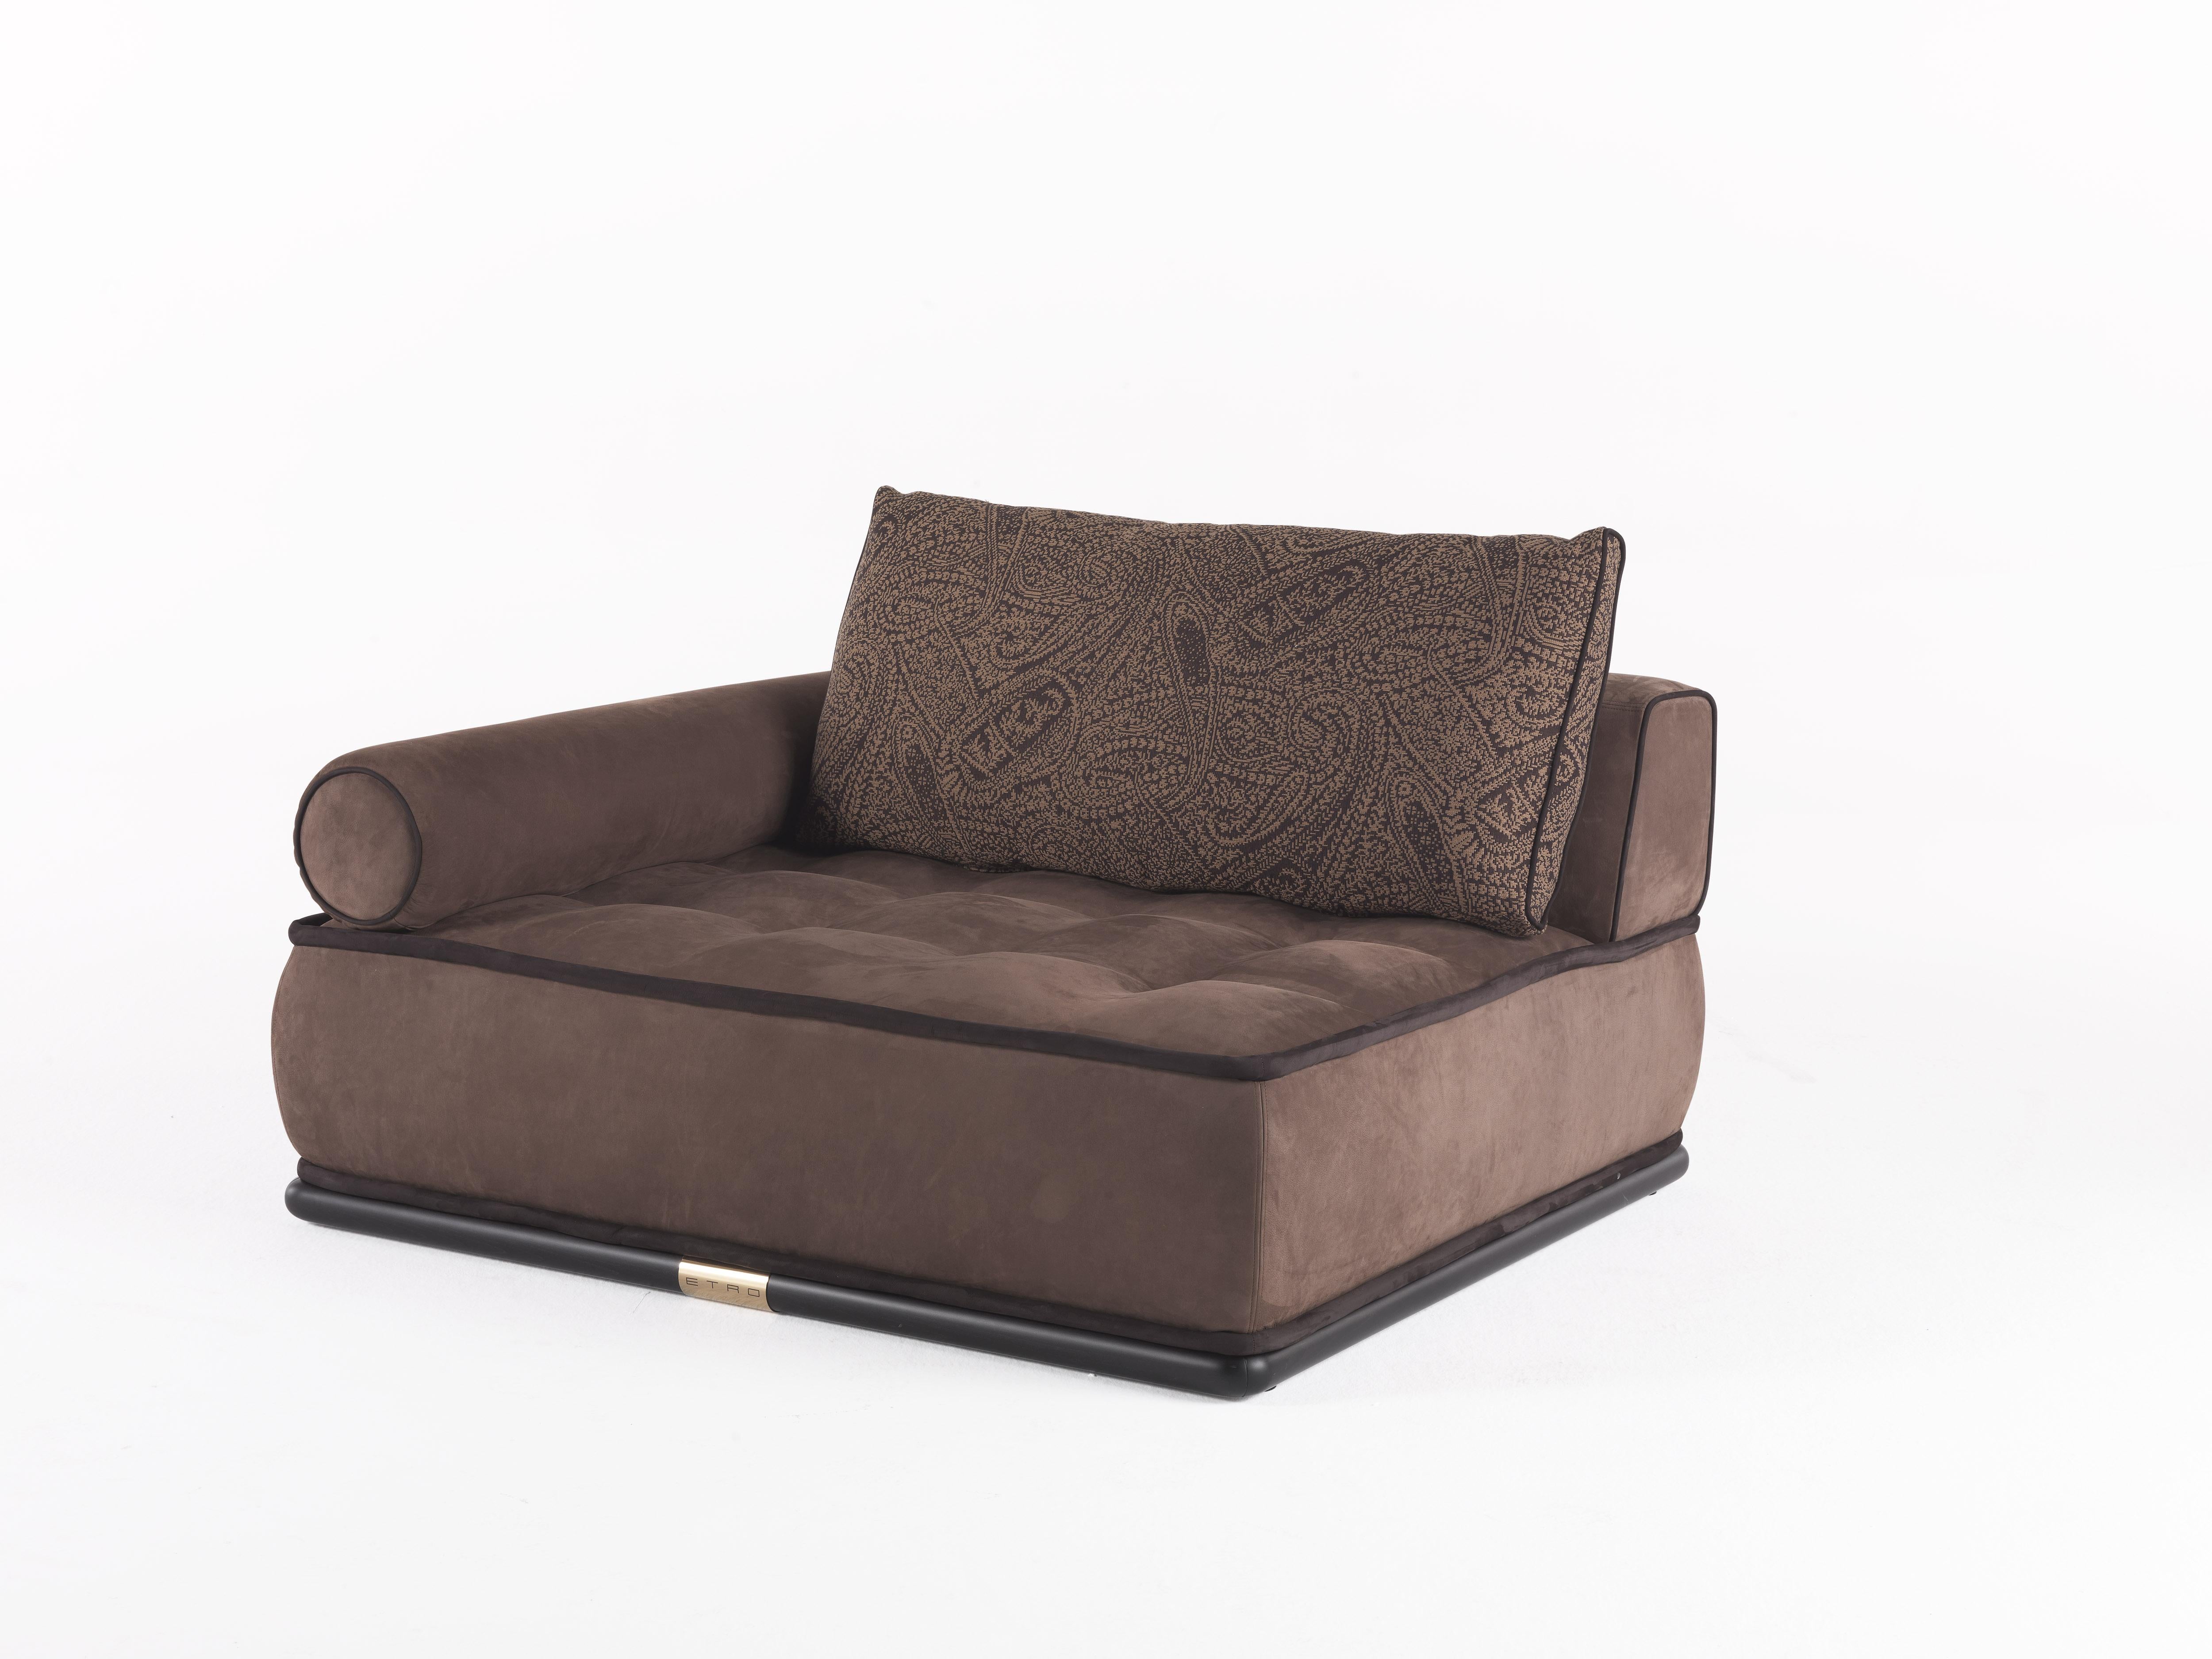 21st Century Woodstock.2 Modular Sofa in Leather by Etro Home Interiors In New Condition For Sale In Cantù, Lombardia